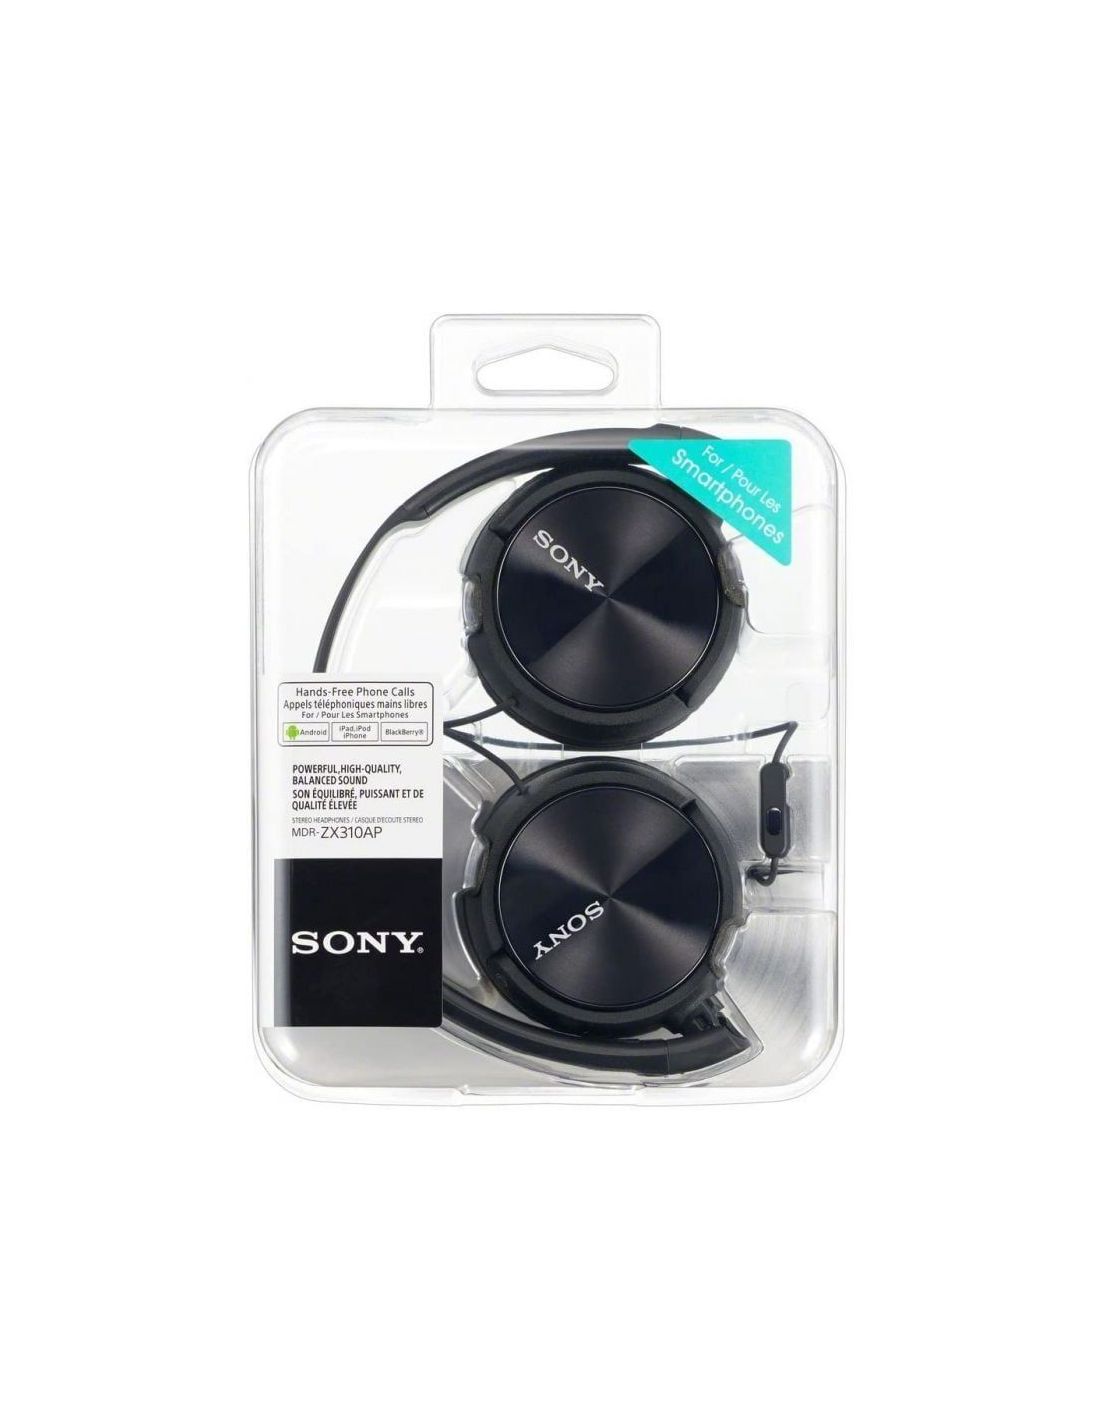 AURICULARES DIADEMA ESTEREO SONY MDR-110LP CABLE 1M JACK 3.5